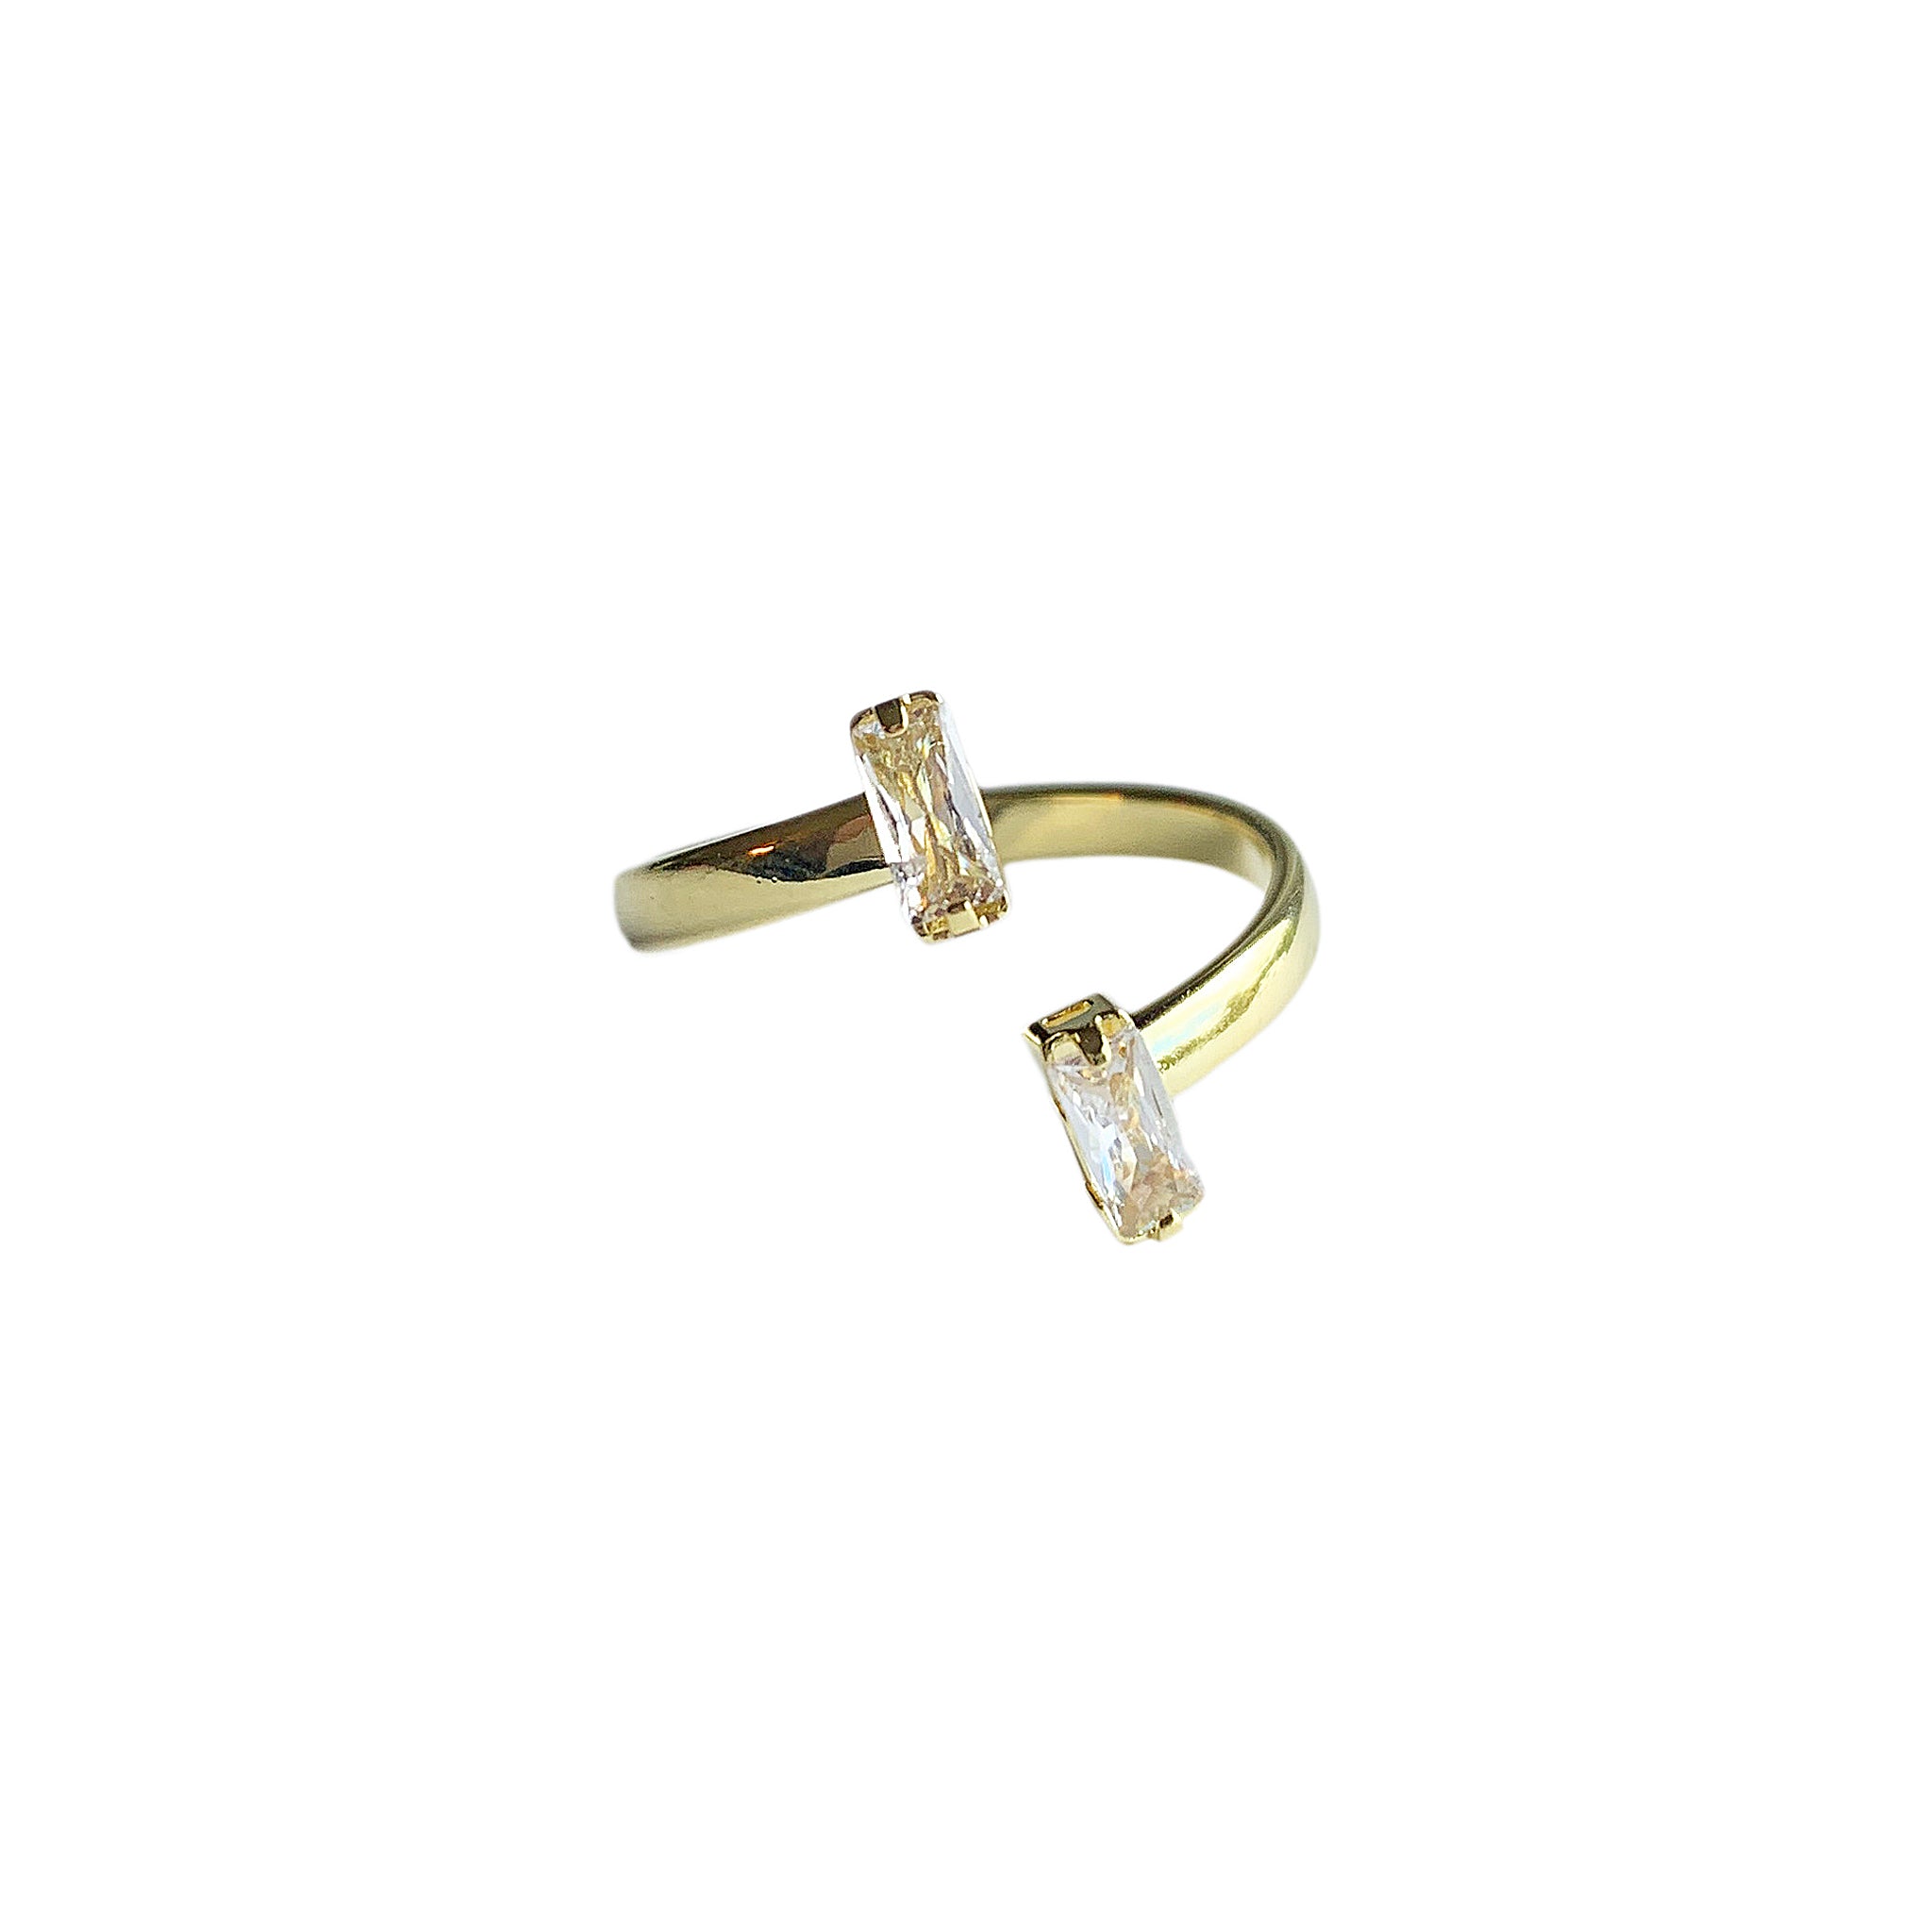 Sheila Fajl Rovena Adjustable Ring in Clear Cubic Zirconia and Gold Plated